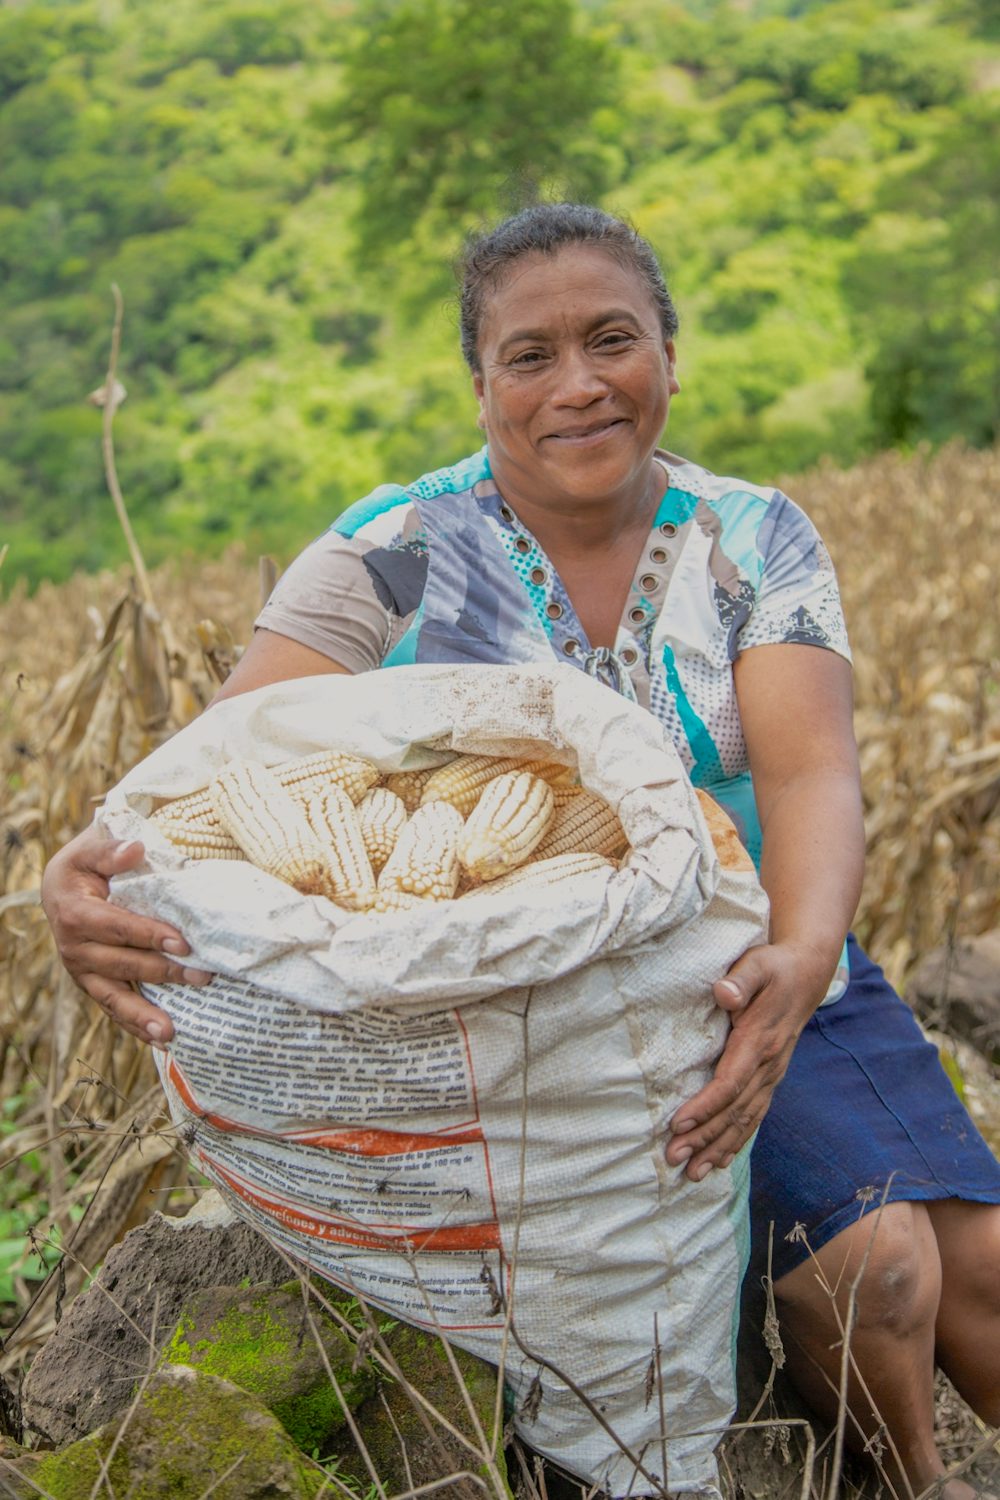 A woman sits in a field, holding a large bag of harvested corn.